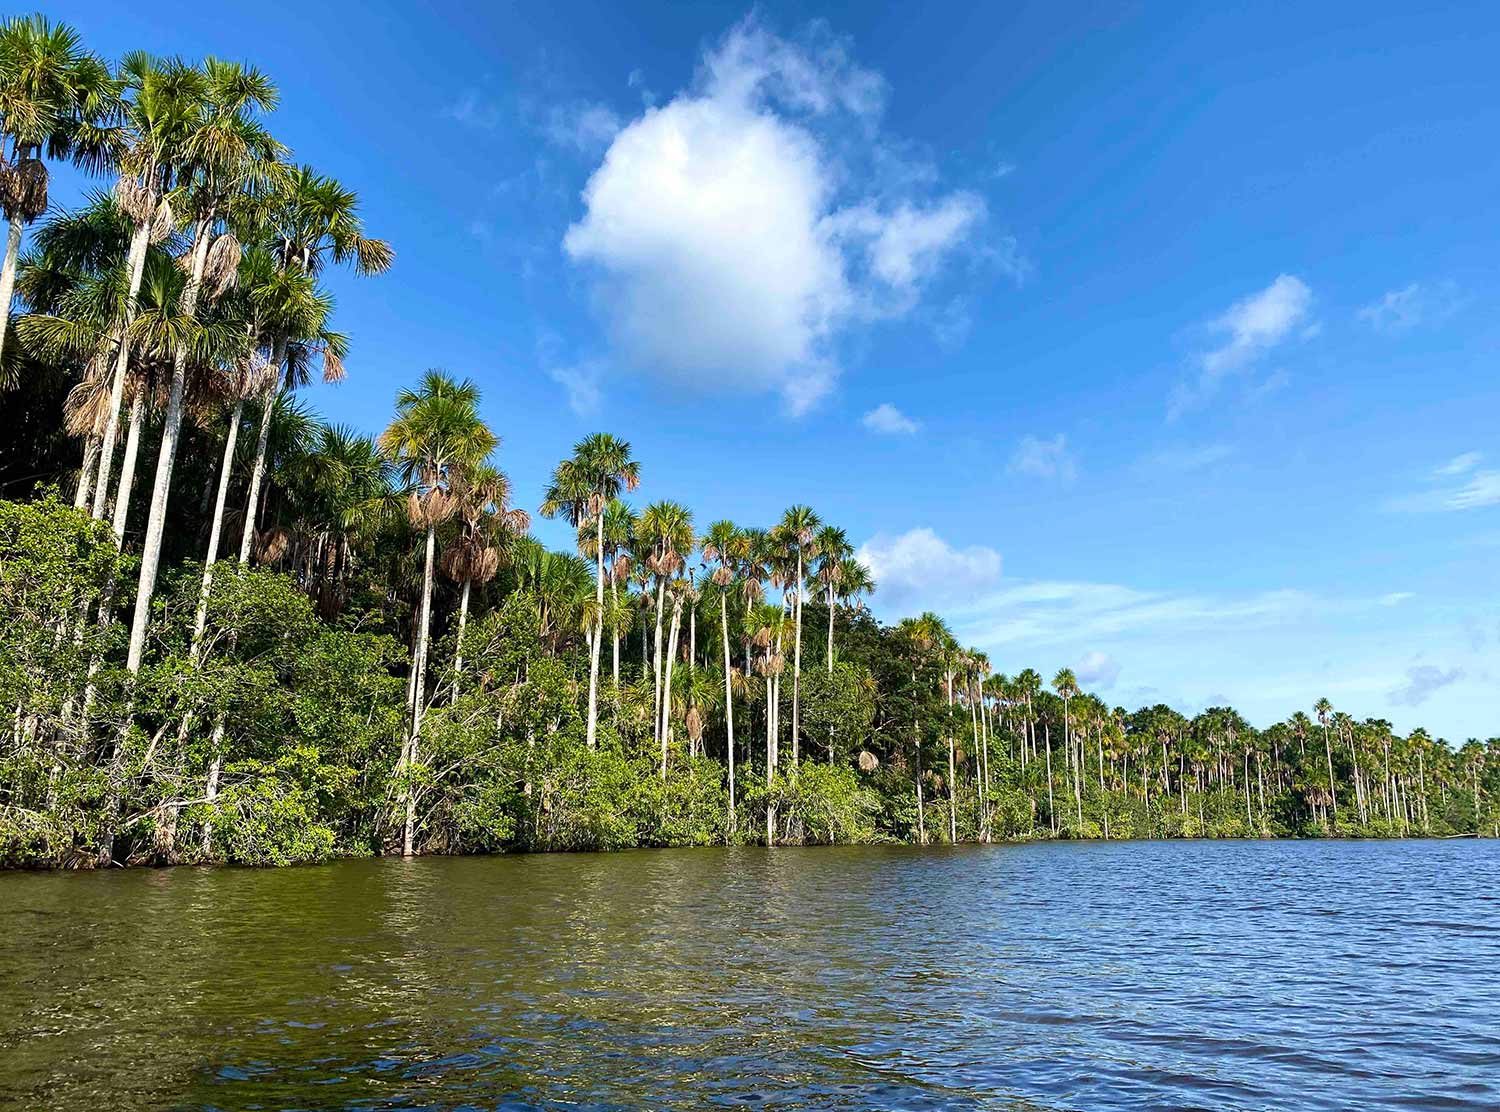 Inkaterra Reserva Amazonica Lake surrounded by palm trees, caimans and other fauna